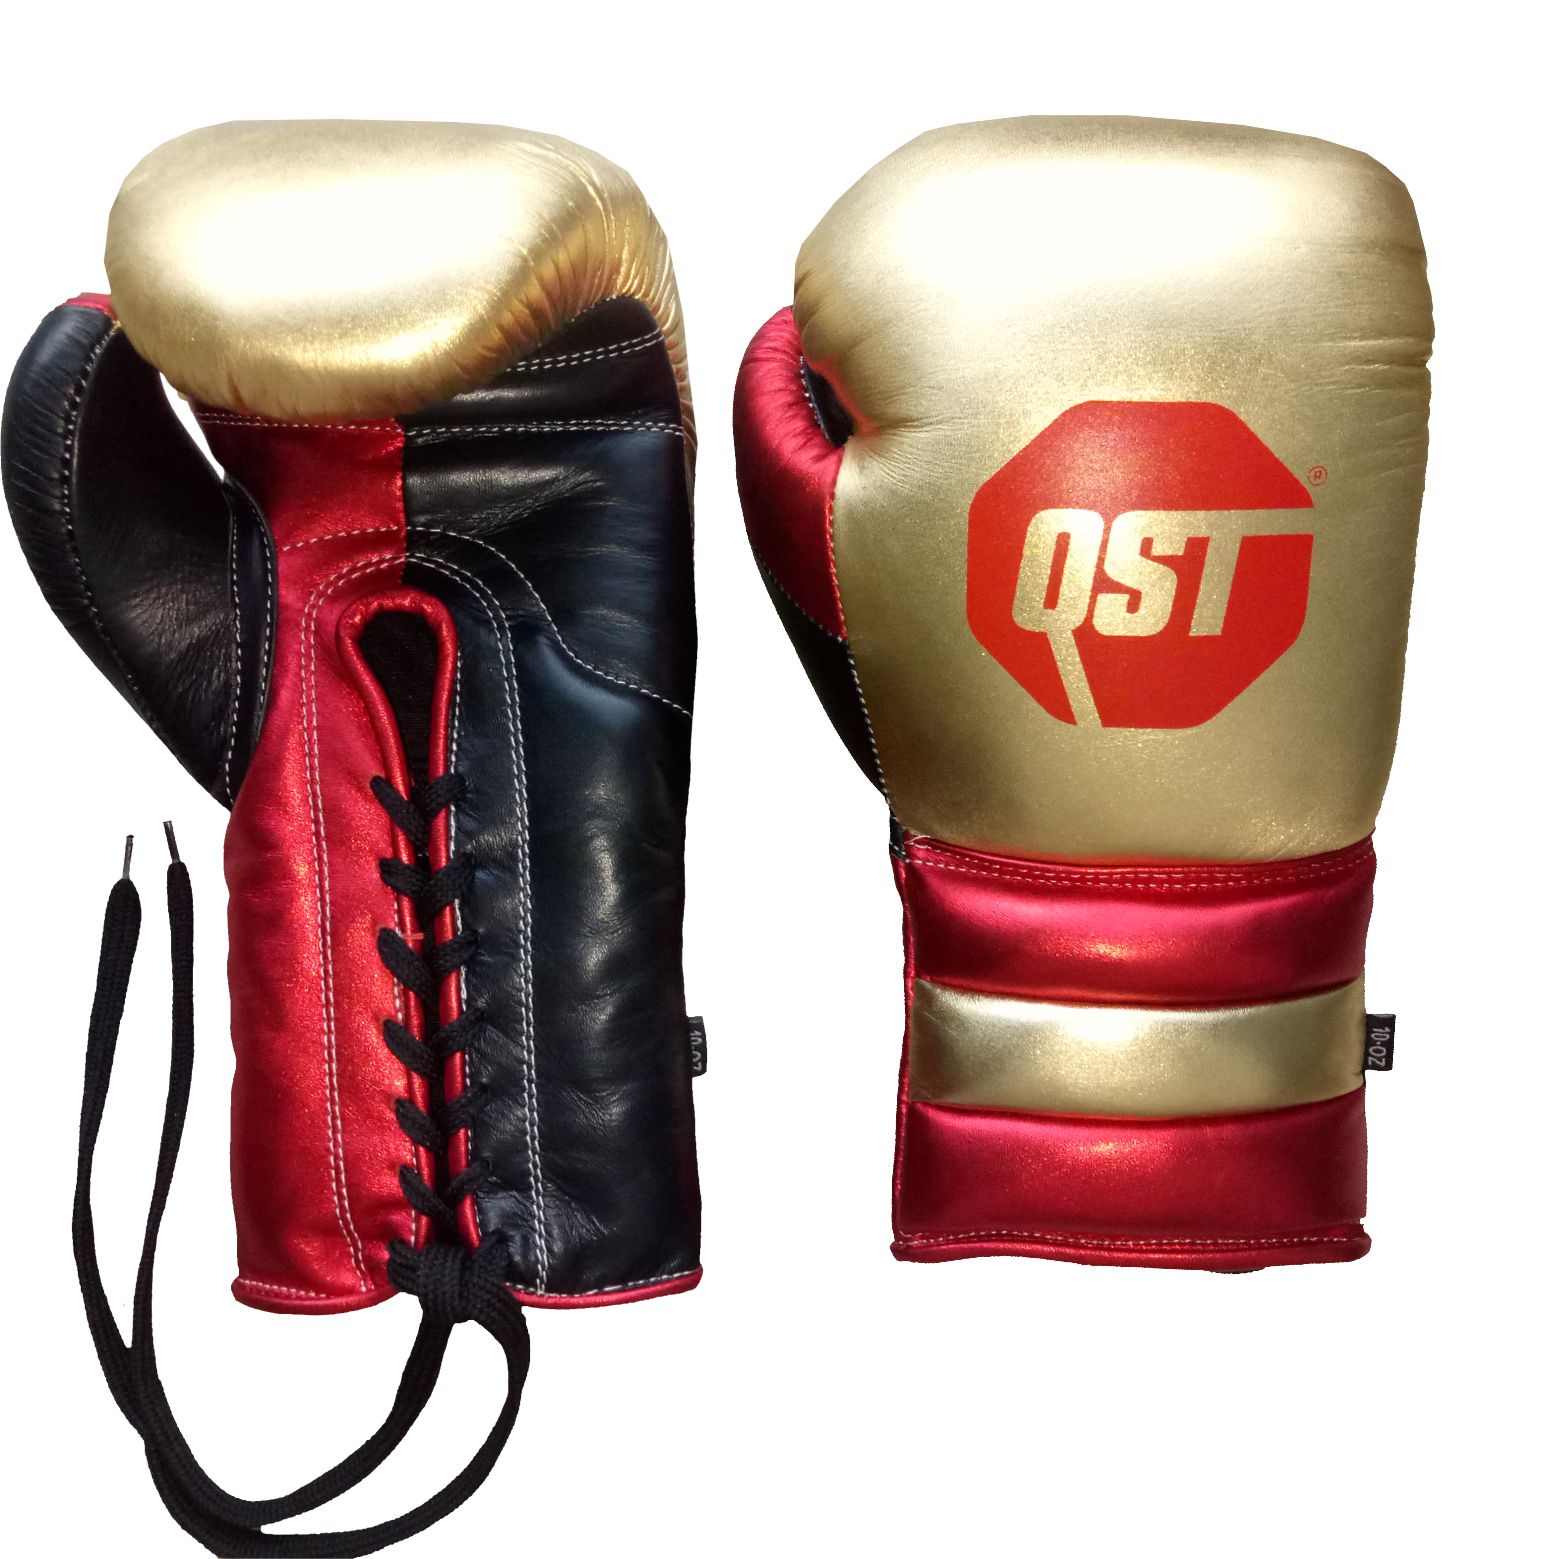 Fight Boxing gloves - Lace up Boxing gloves - Metallic Boxing 